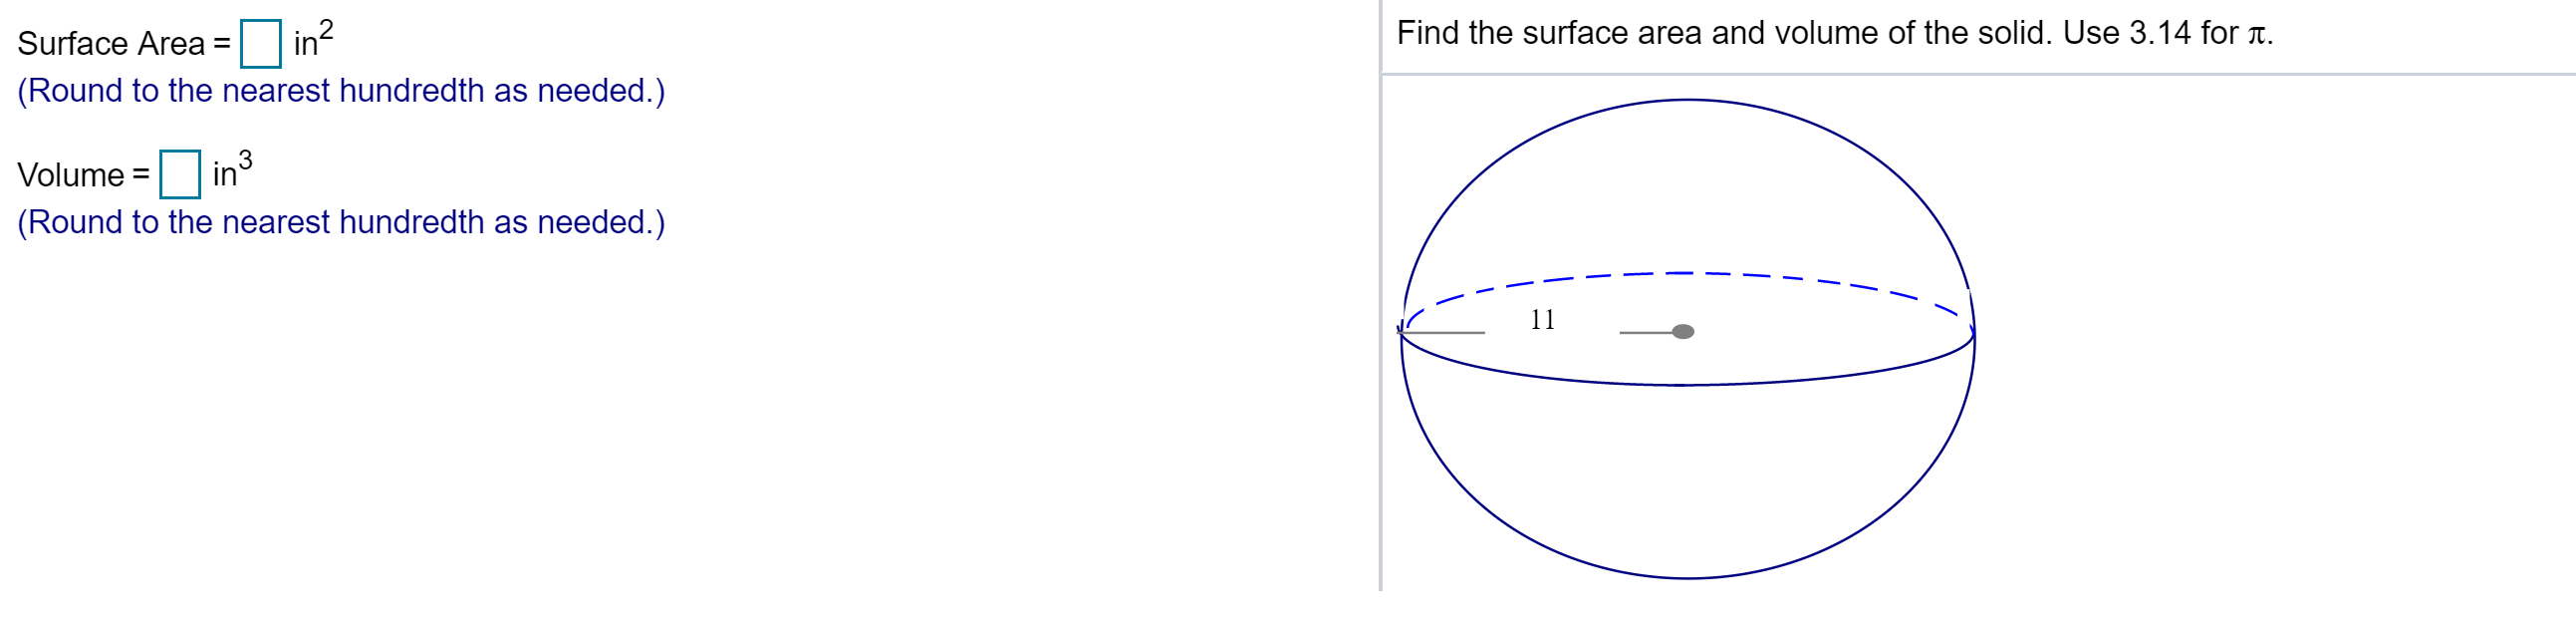 in?
Find the surface area and volume of the solid. Use 3.14 for T.
Surface Area
(Round to the nearest hundredth as needed.)
3
in
Volume =
(Round to the nearest hundredth as needed.)
